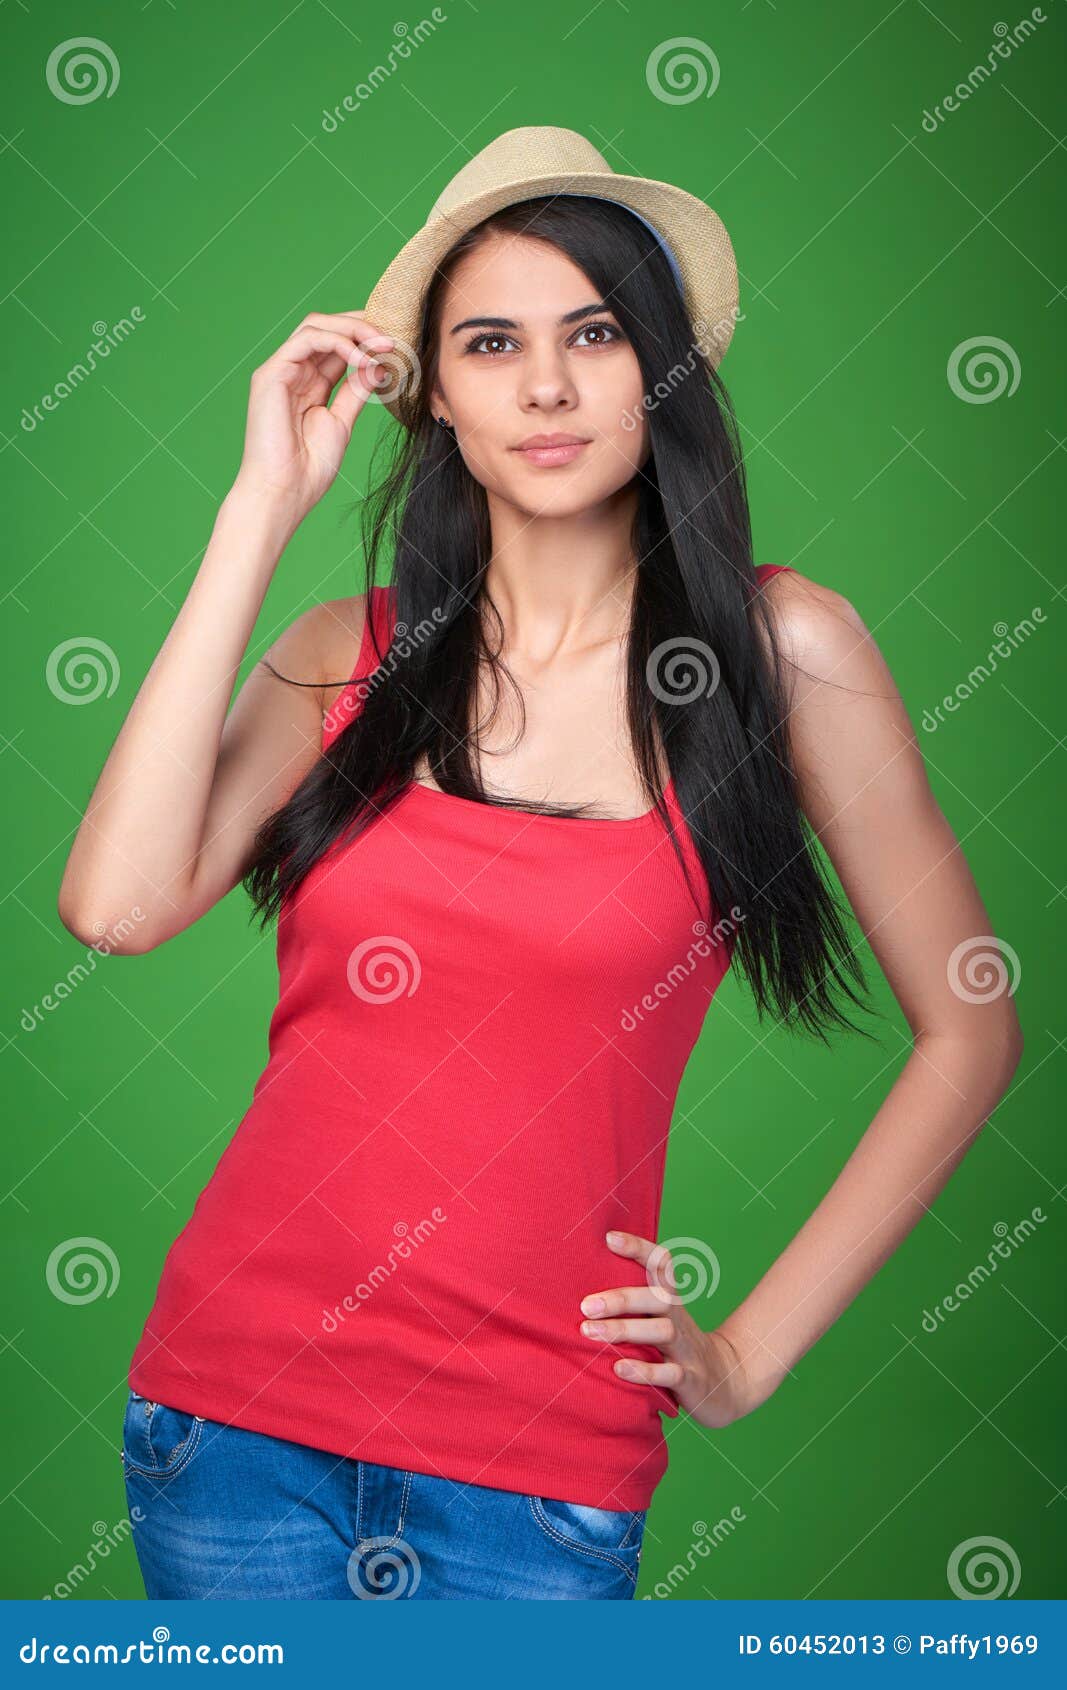 Teen Girl Wearing Straw Hat Looking Up Stock Image I